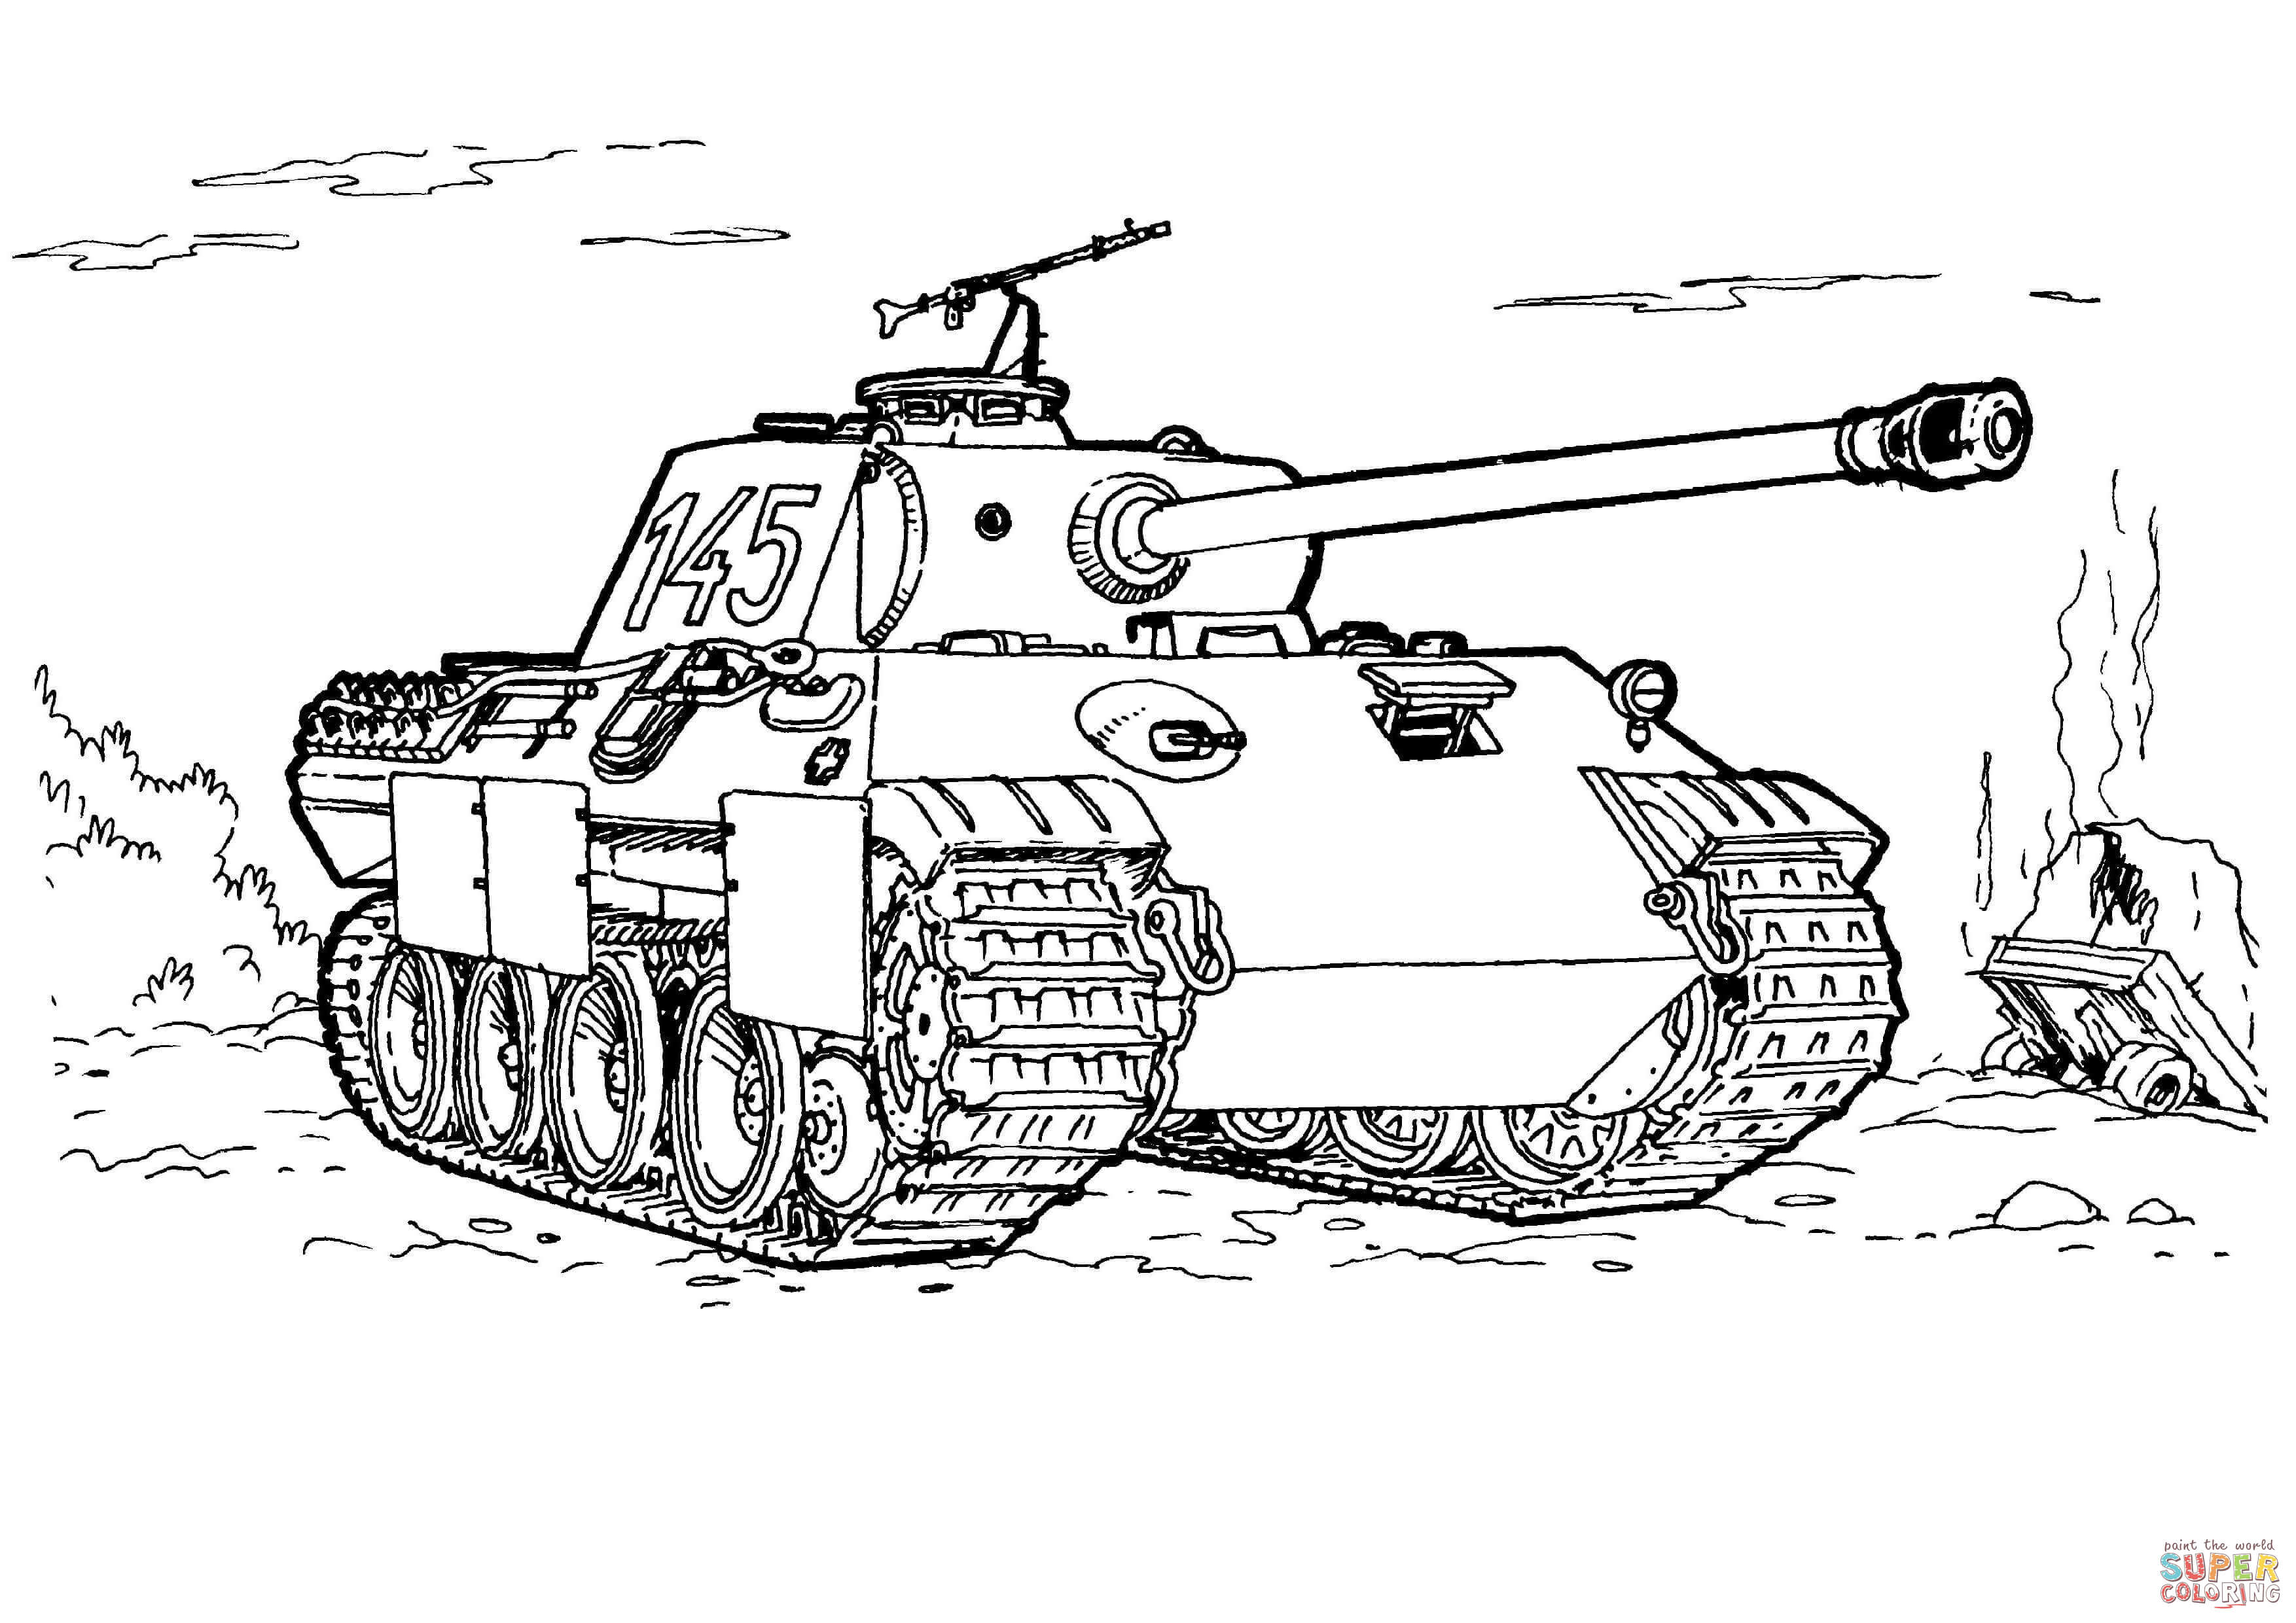 Panther tank coloring page free printable coloring pages